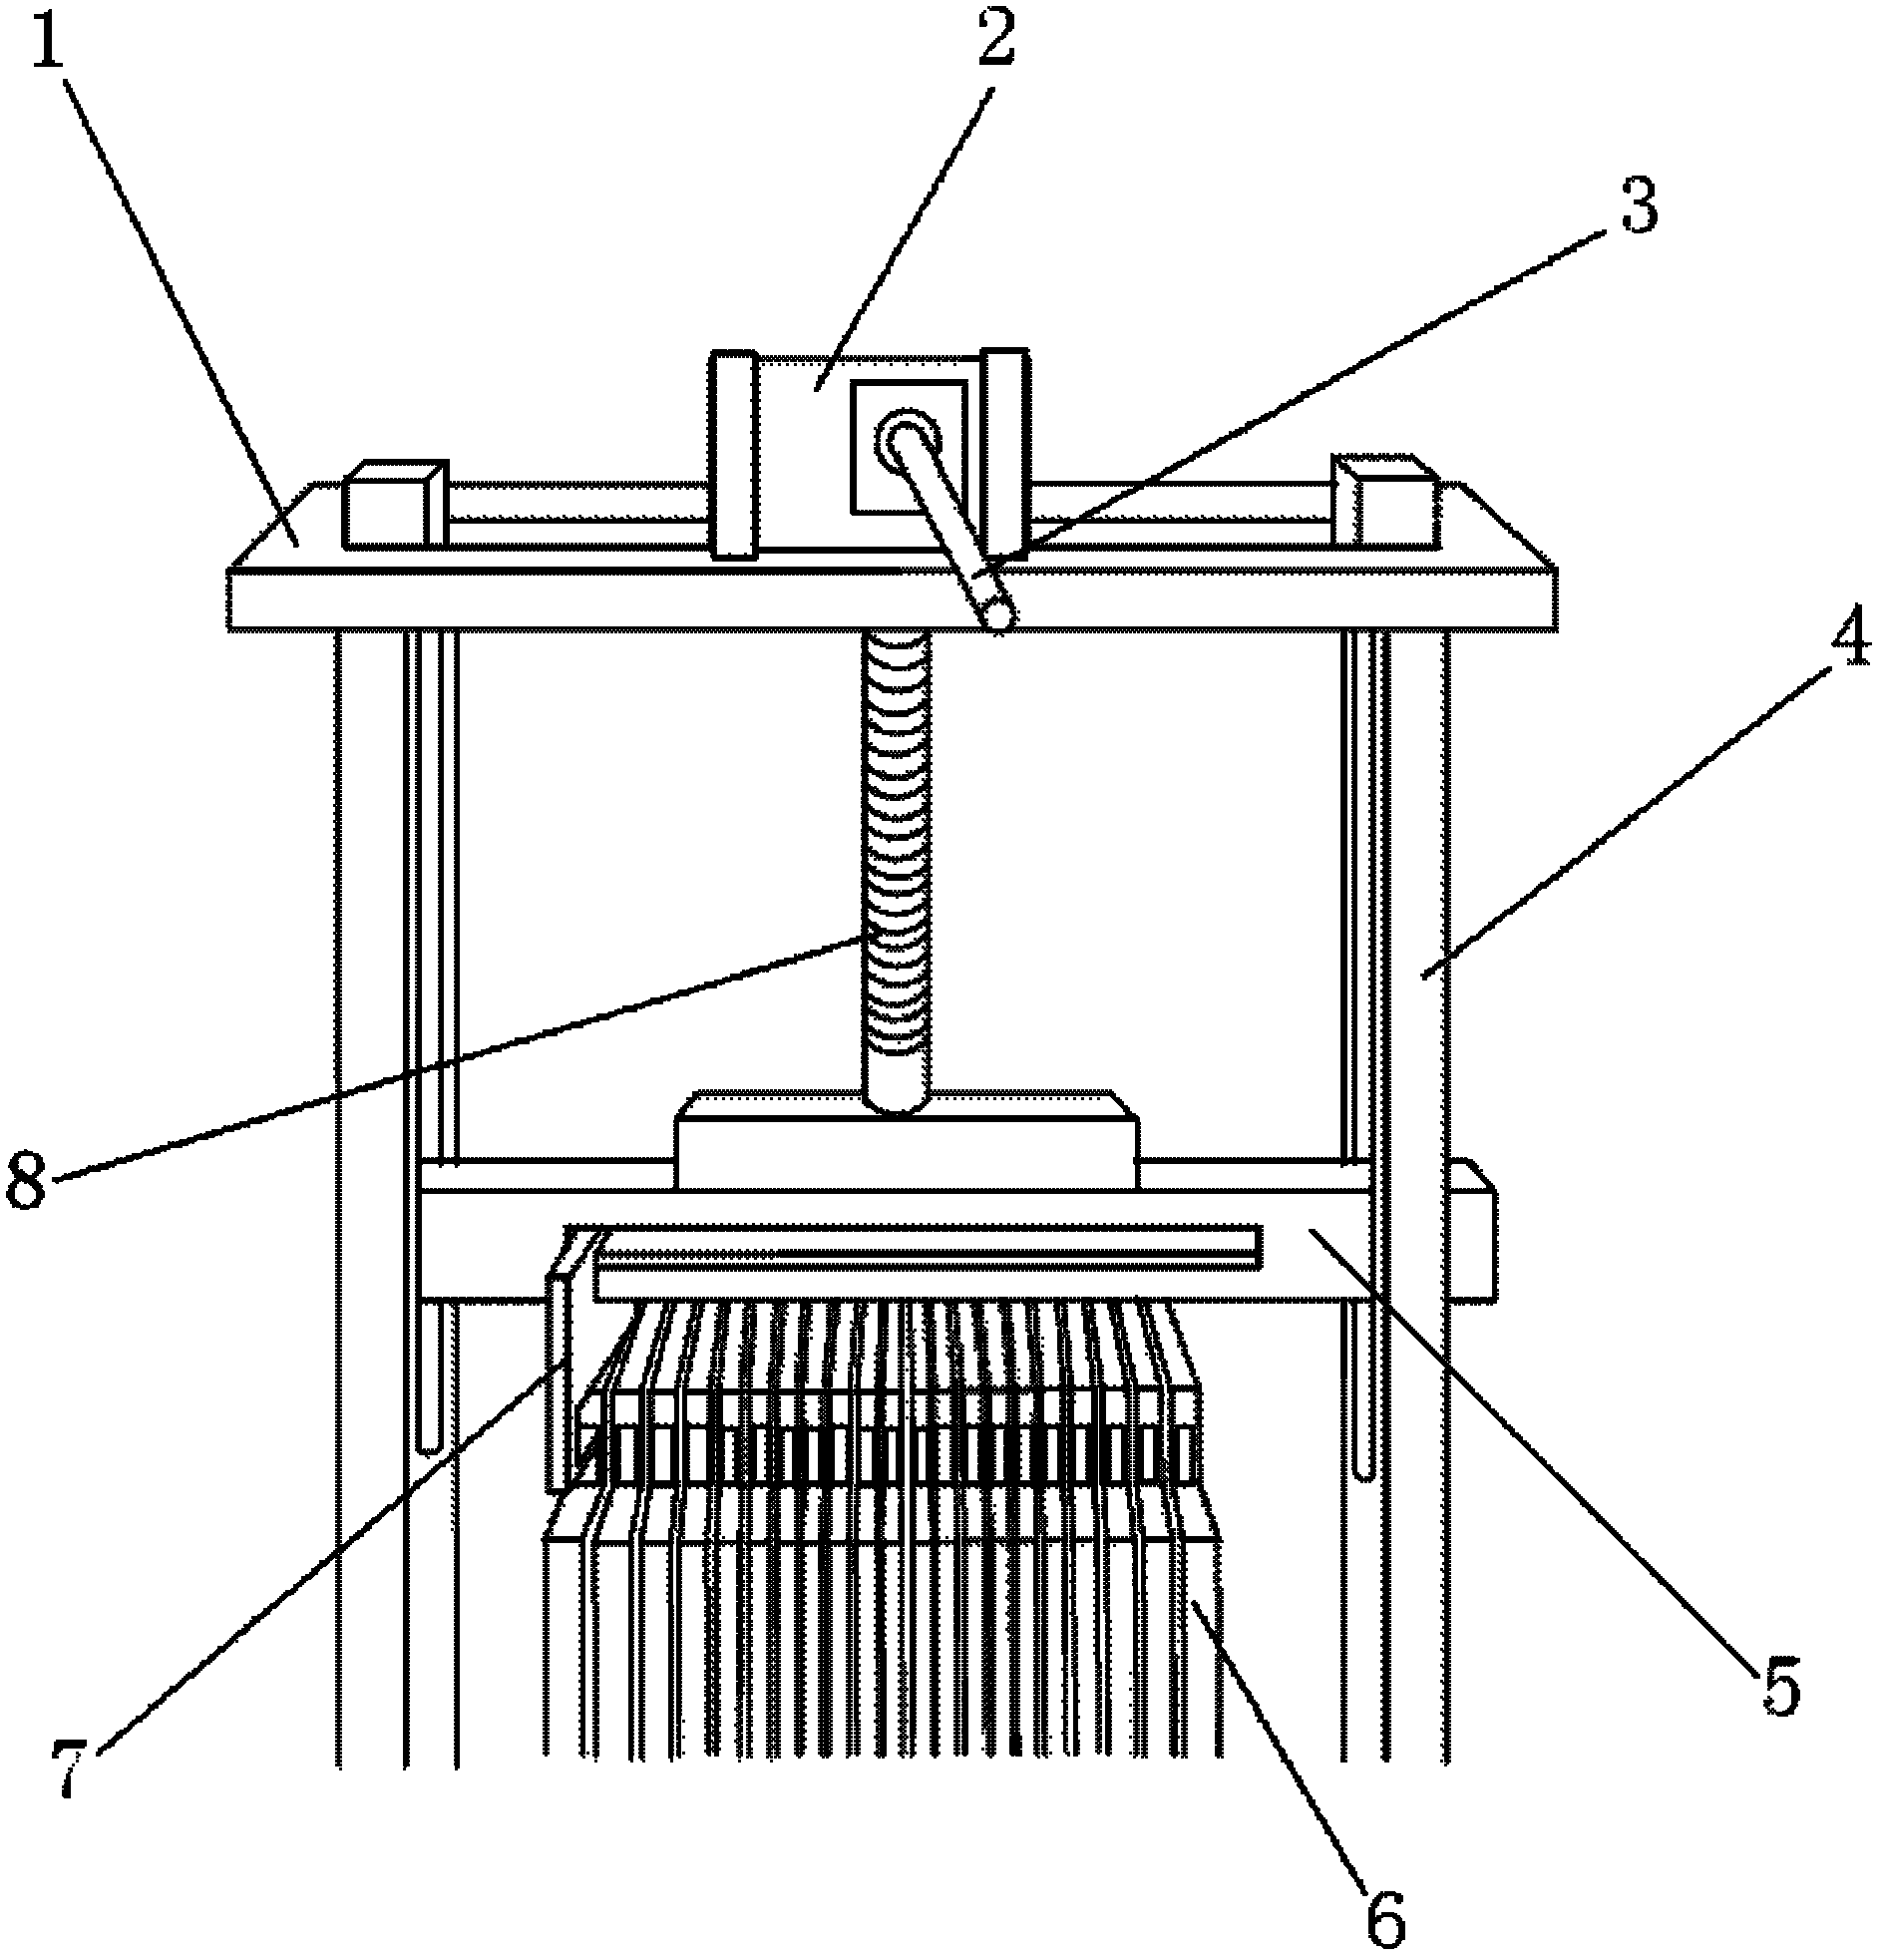 Heald separation device for spinner